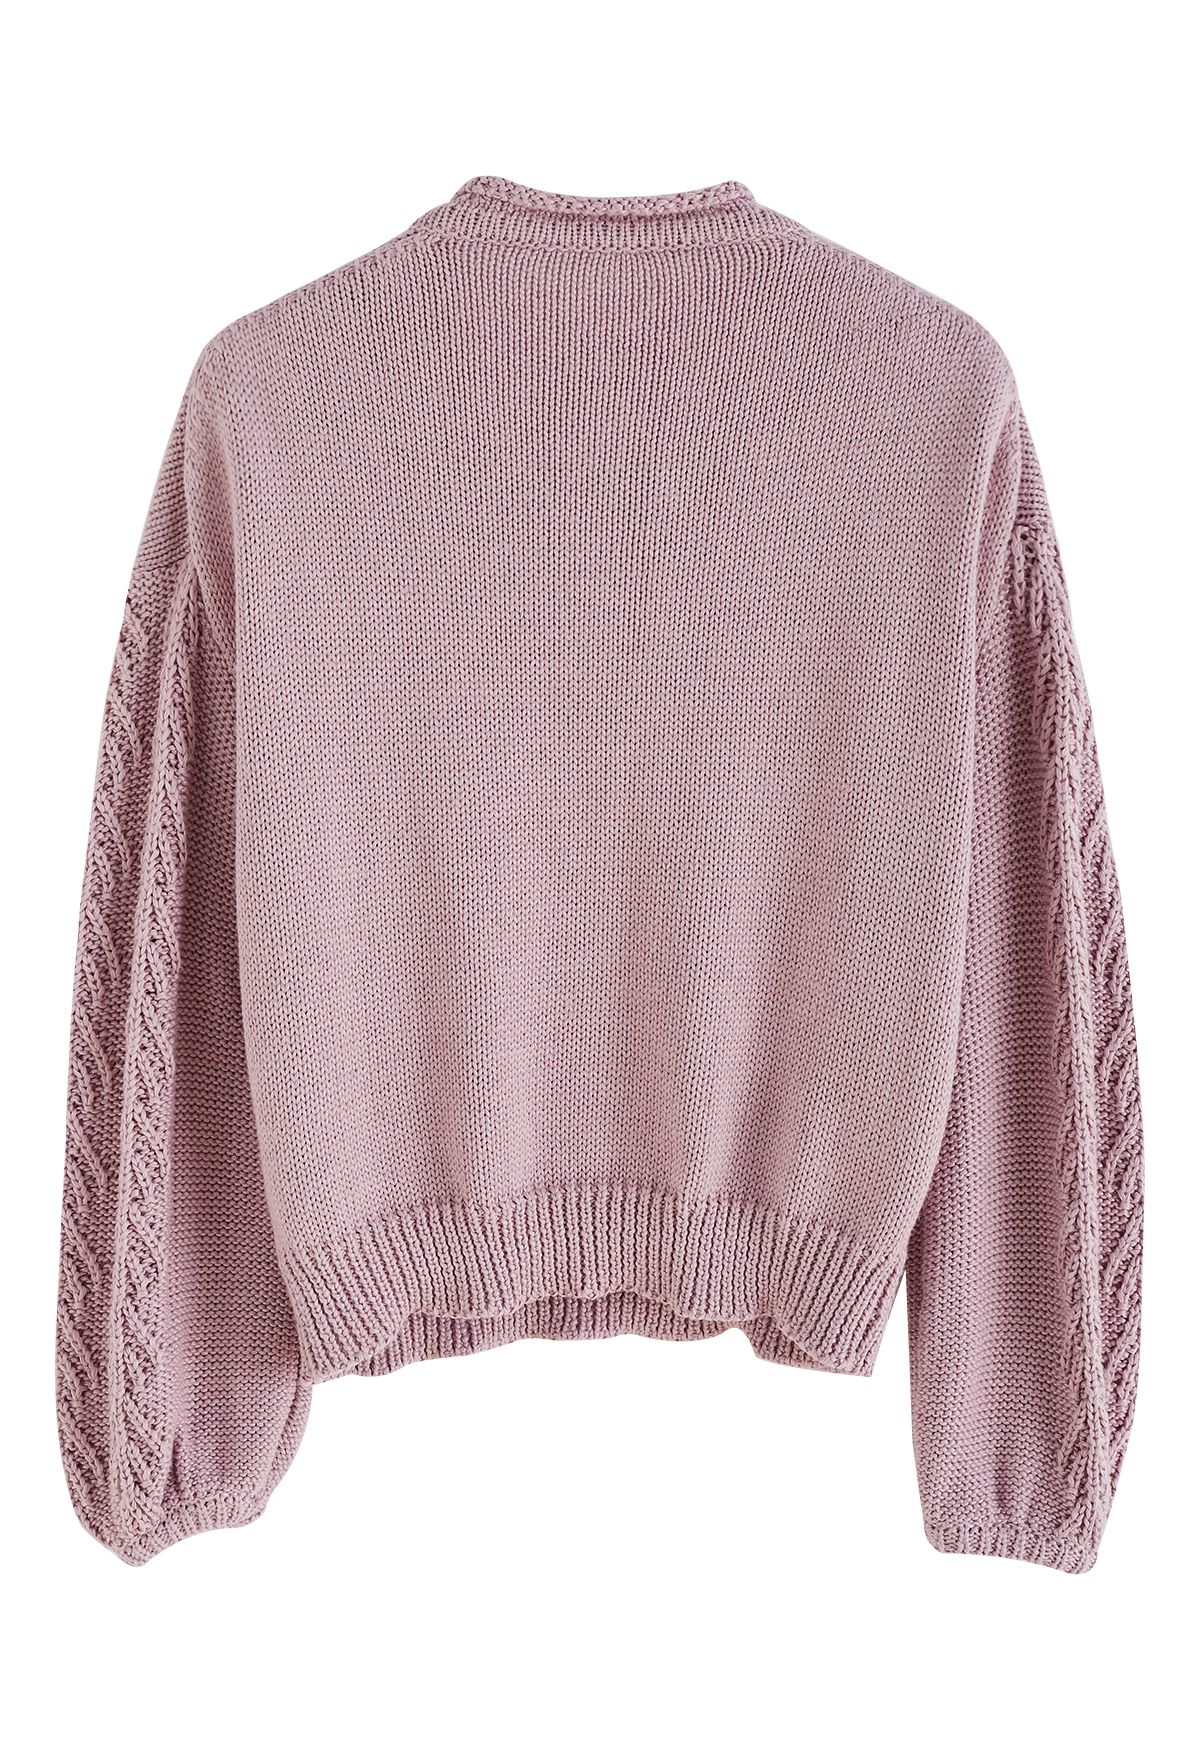 Blooming Passion Floral Stitch V-Neck Knit Sweater in Pink